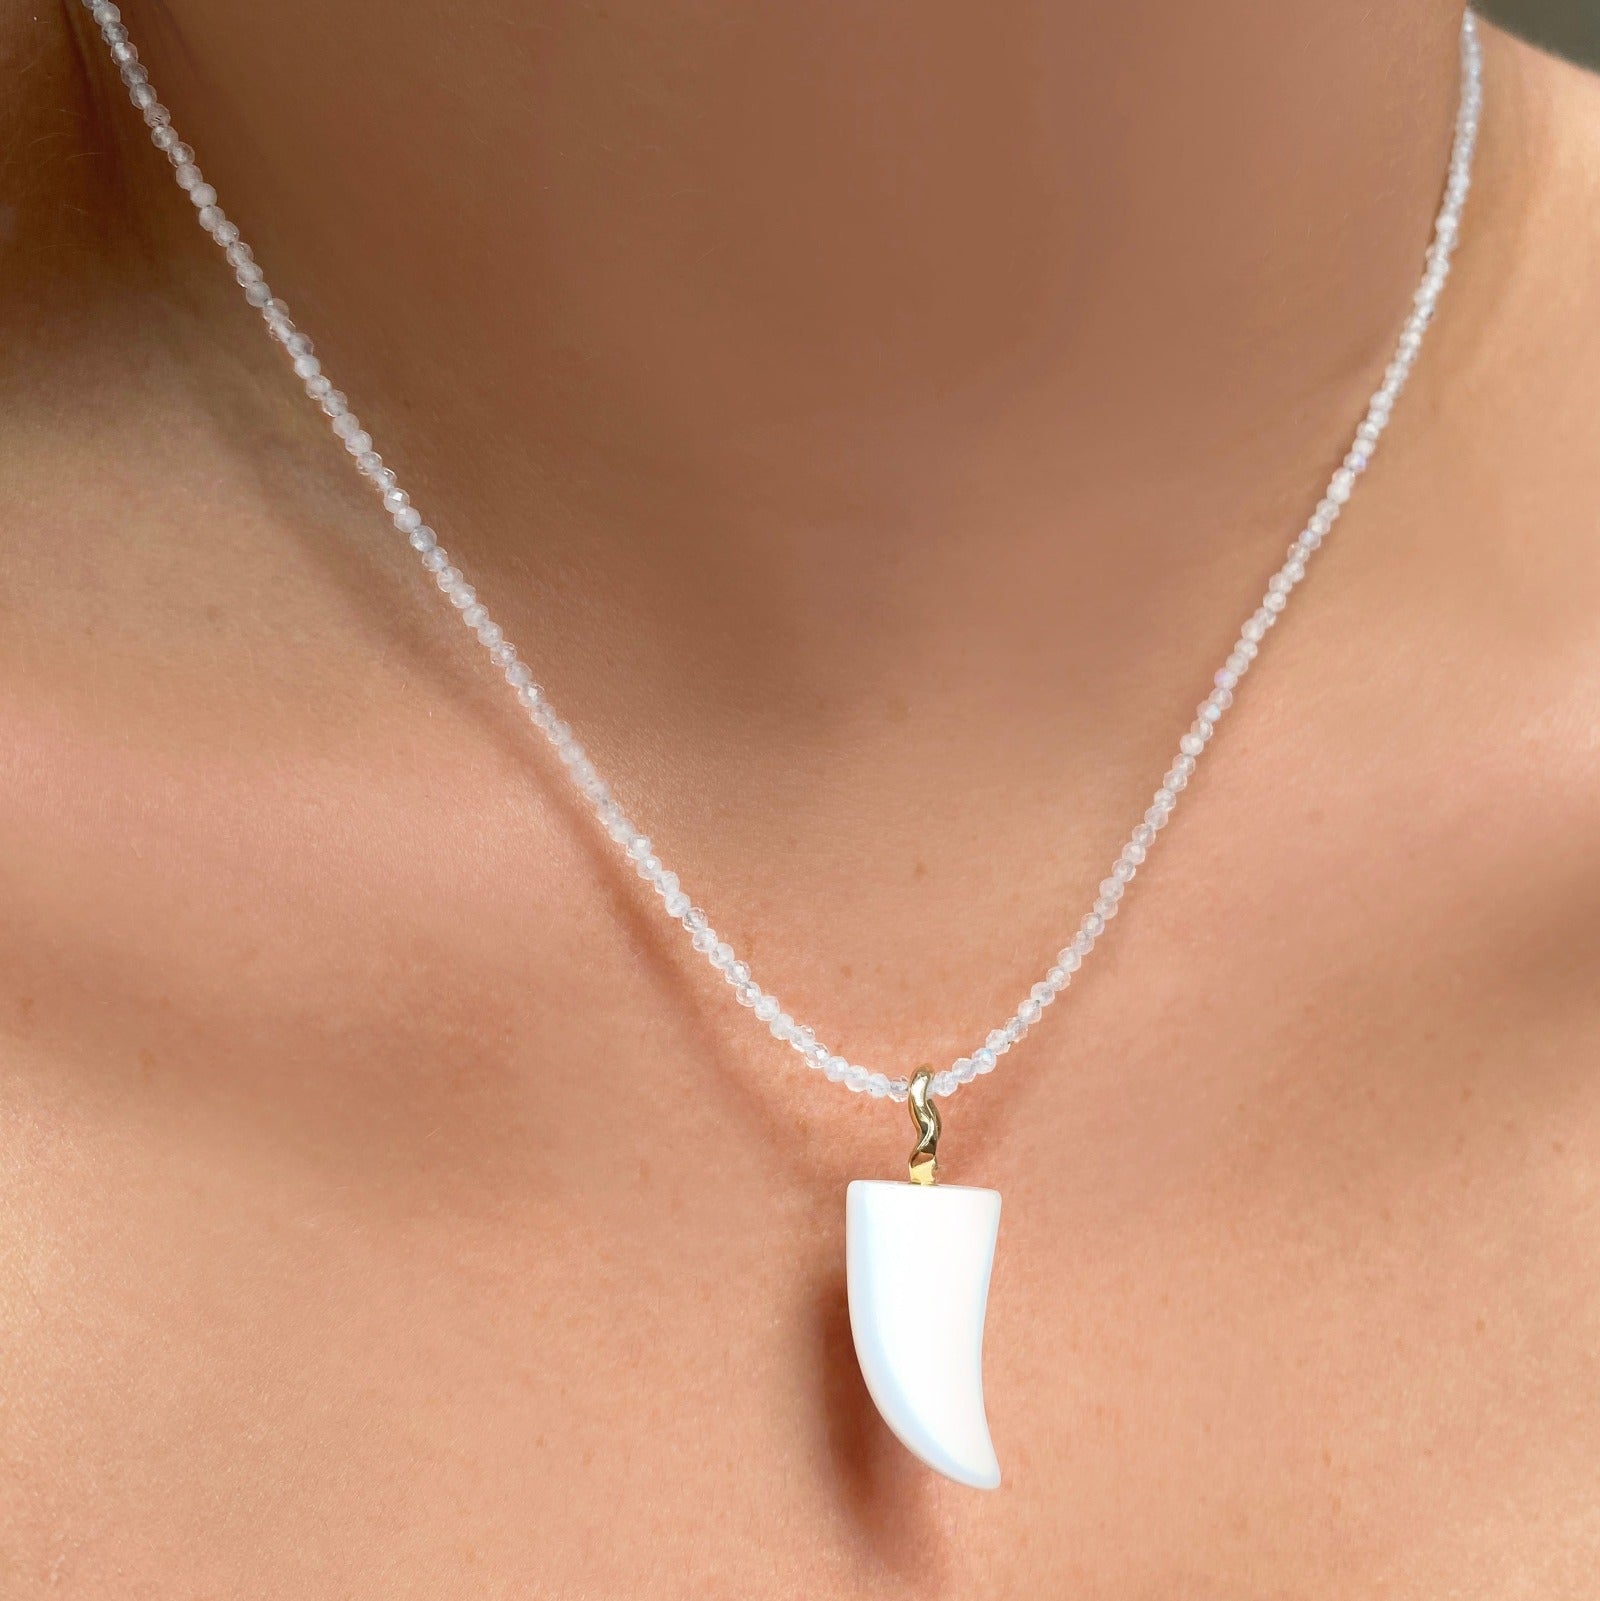 White agate horn charm. Styled on a neck hanging from a beaded necklace.